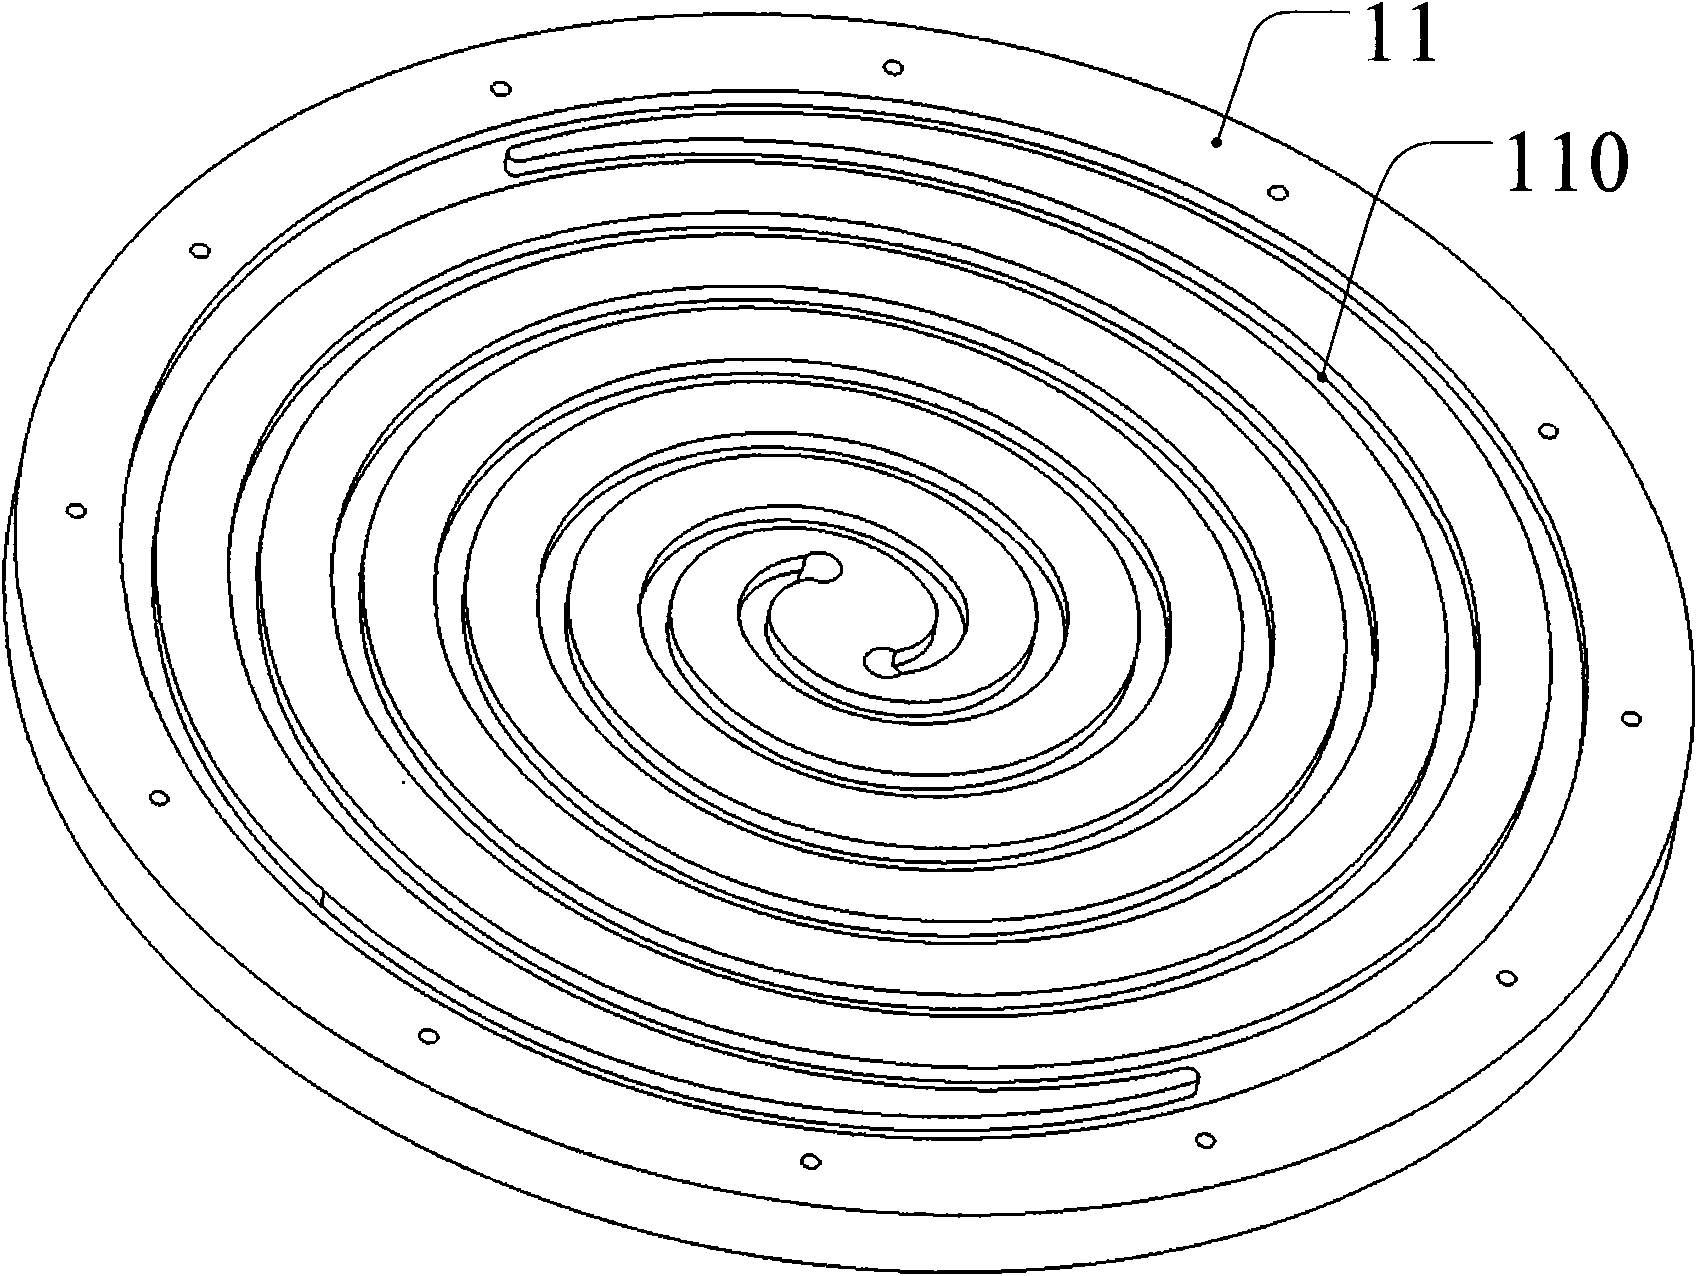 A polishing disk with internal circulated cooling